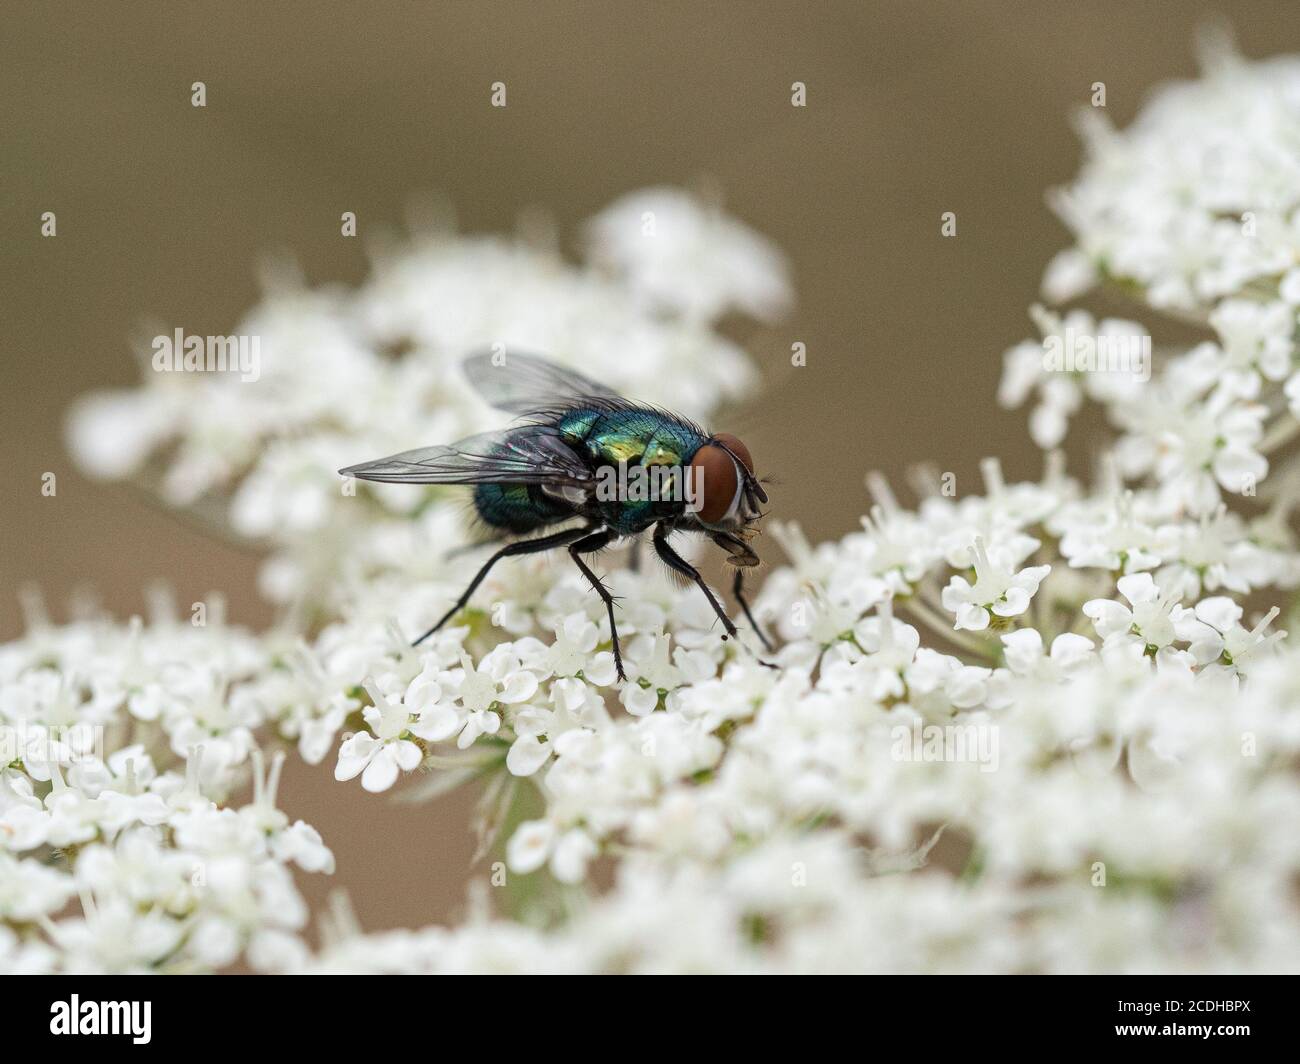 A close up of a common green bottle fly - Lucilia sericata feeding on the flowerhead of a wild carrot - Daucus carota Stock Photo